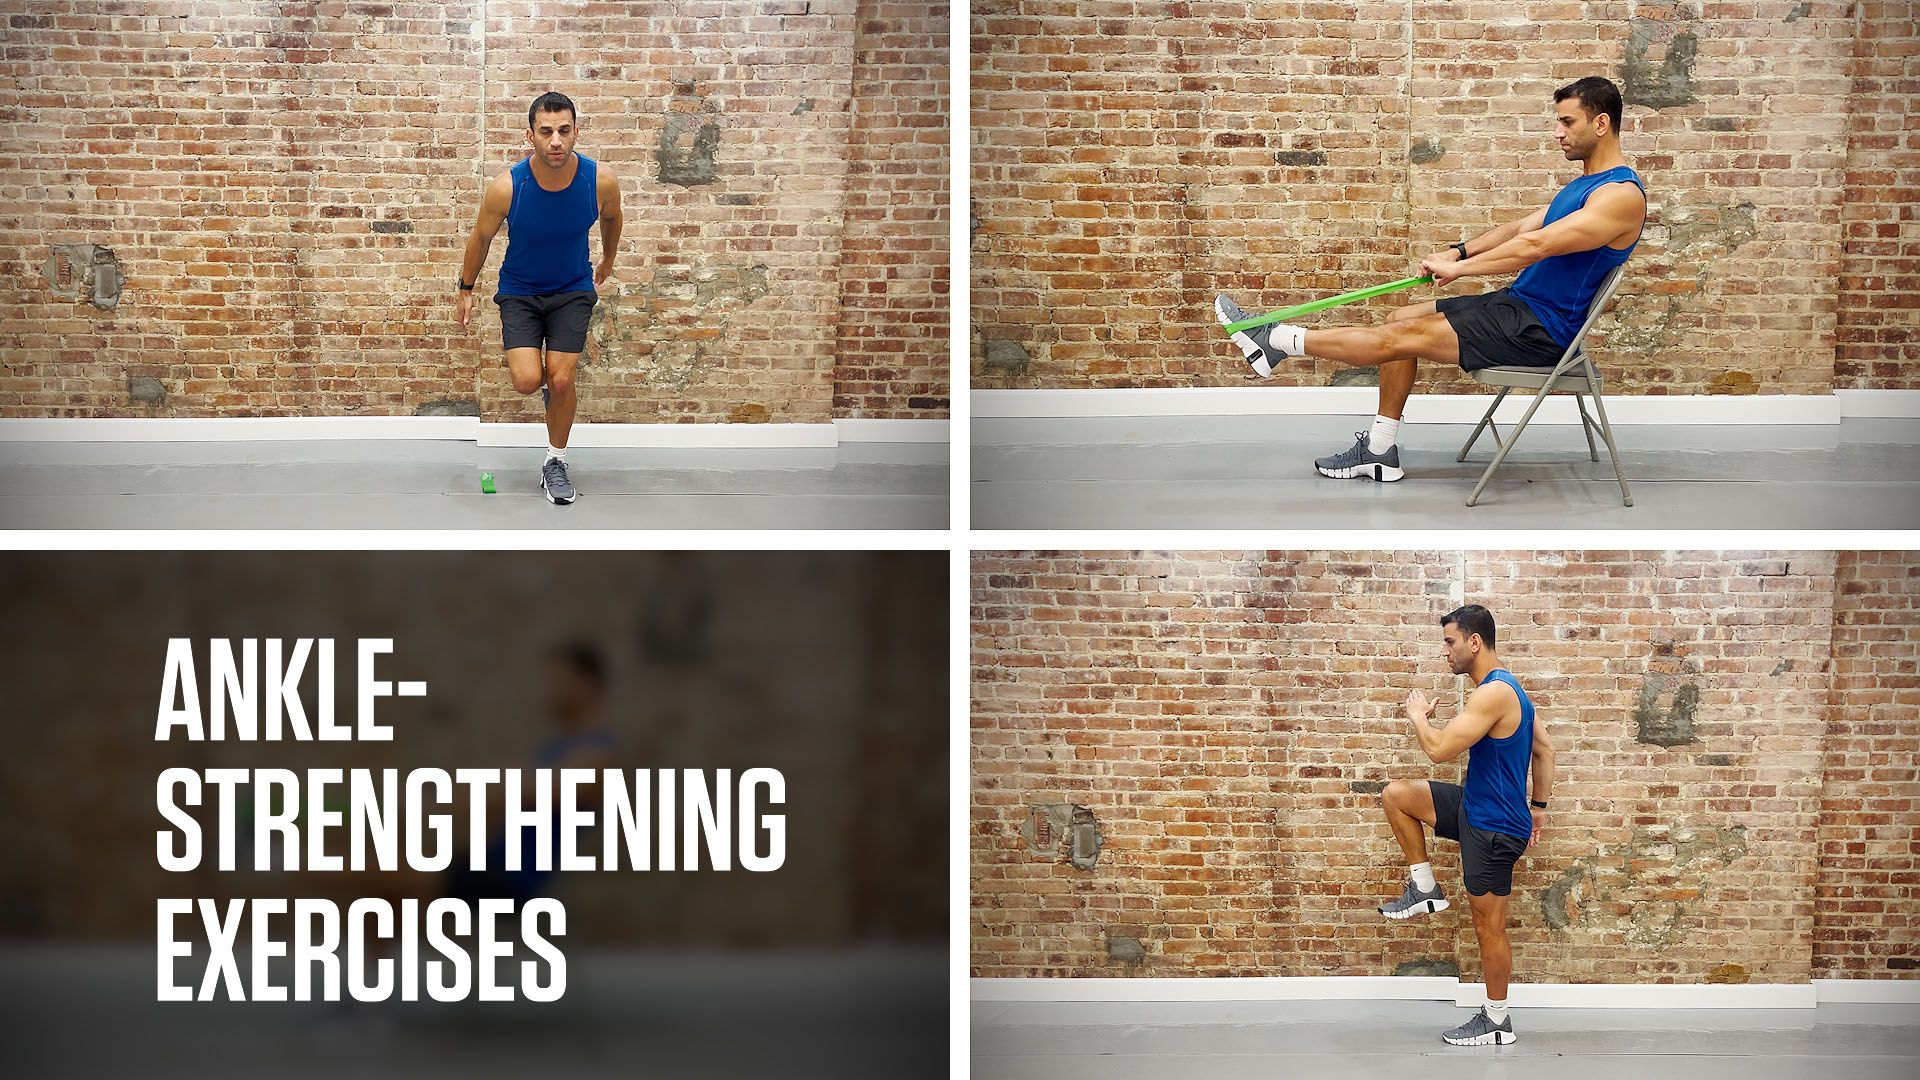 The 6 best ankle strengthening exercises - Time to be United!